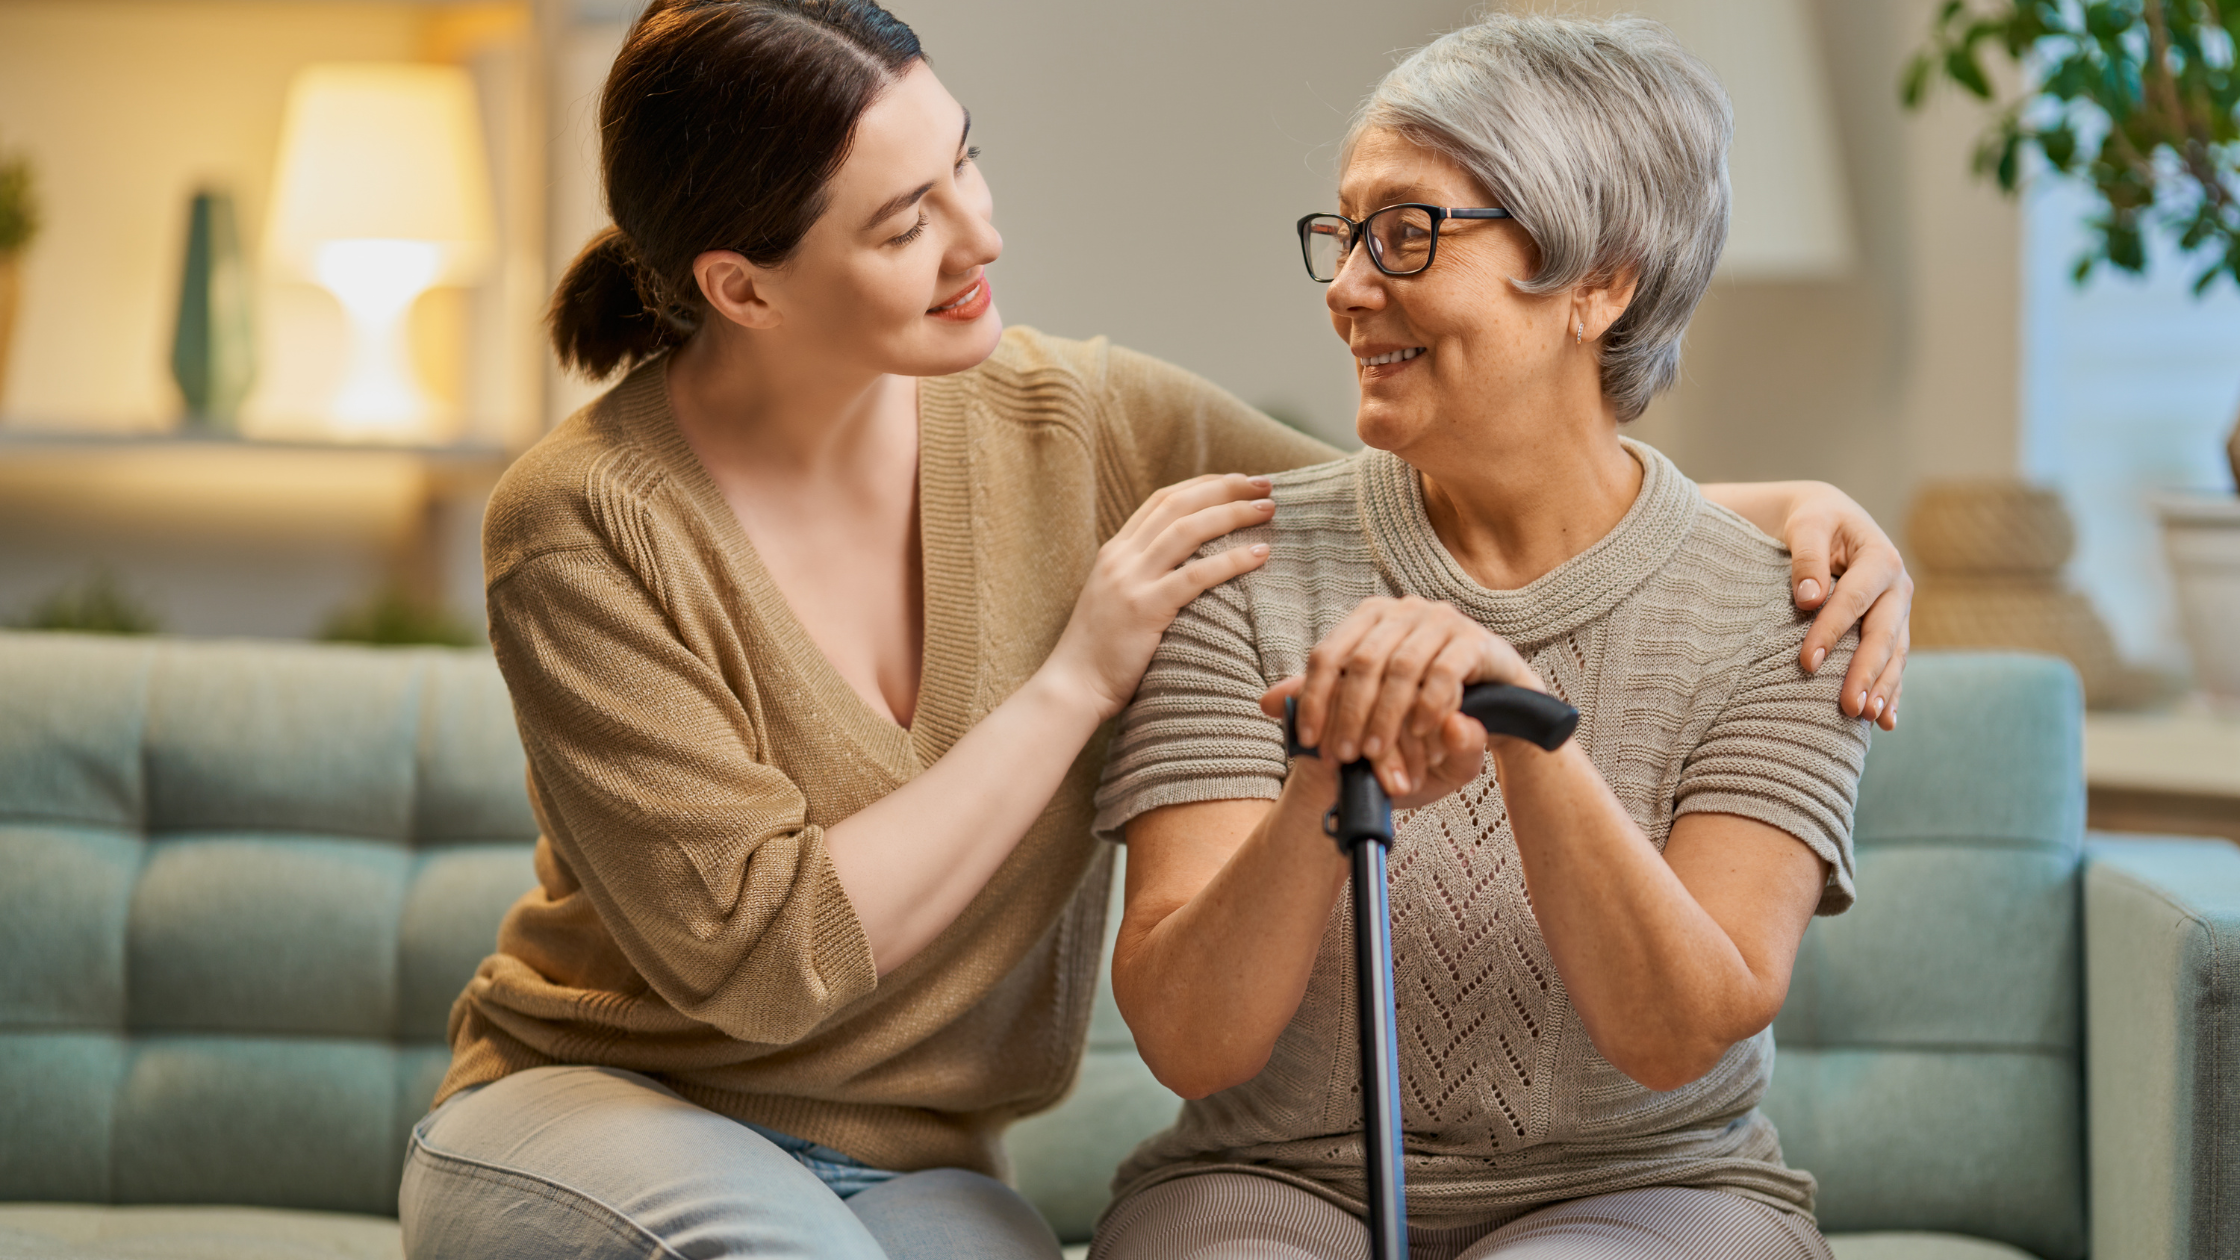 Family Caregiving Is A Difficult Job: How To Know When You Need Help